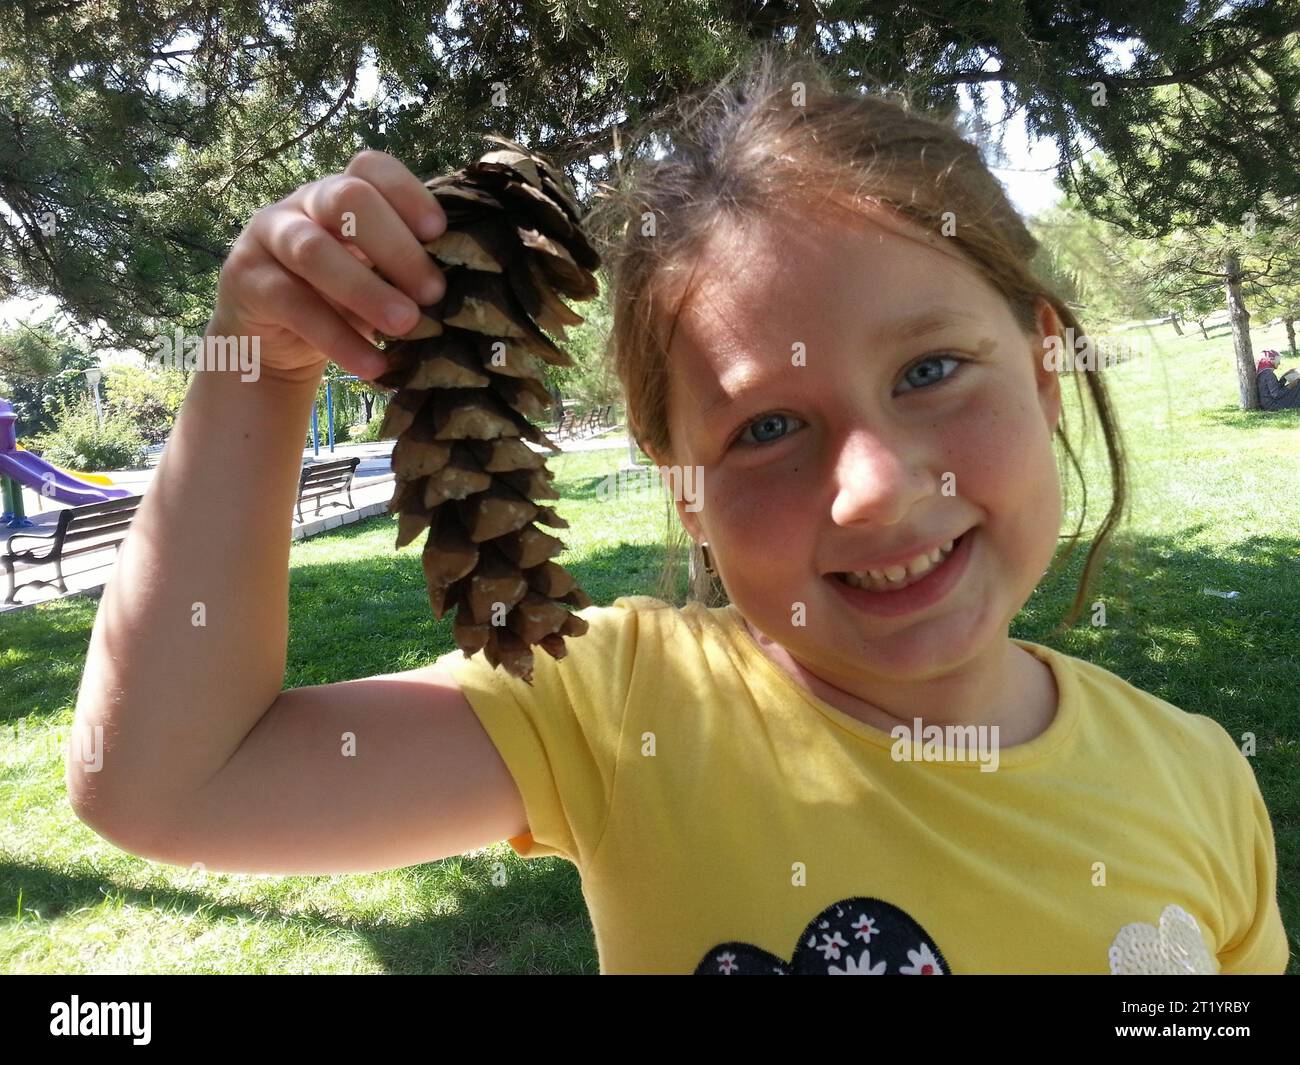 The cute and cheerful girl holding a pine cone is smiling. Stock Photo